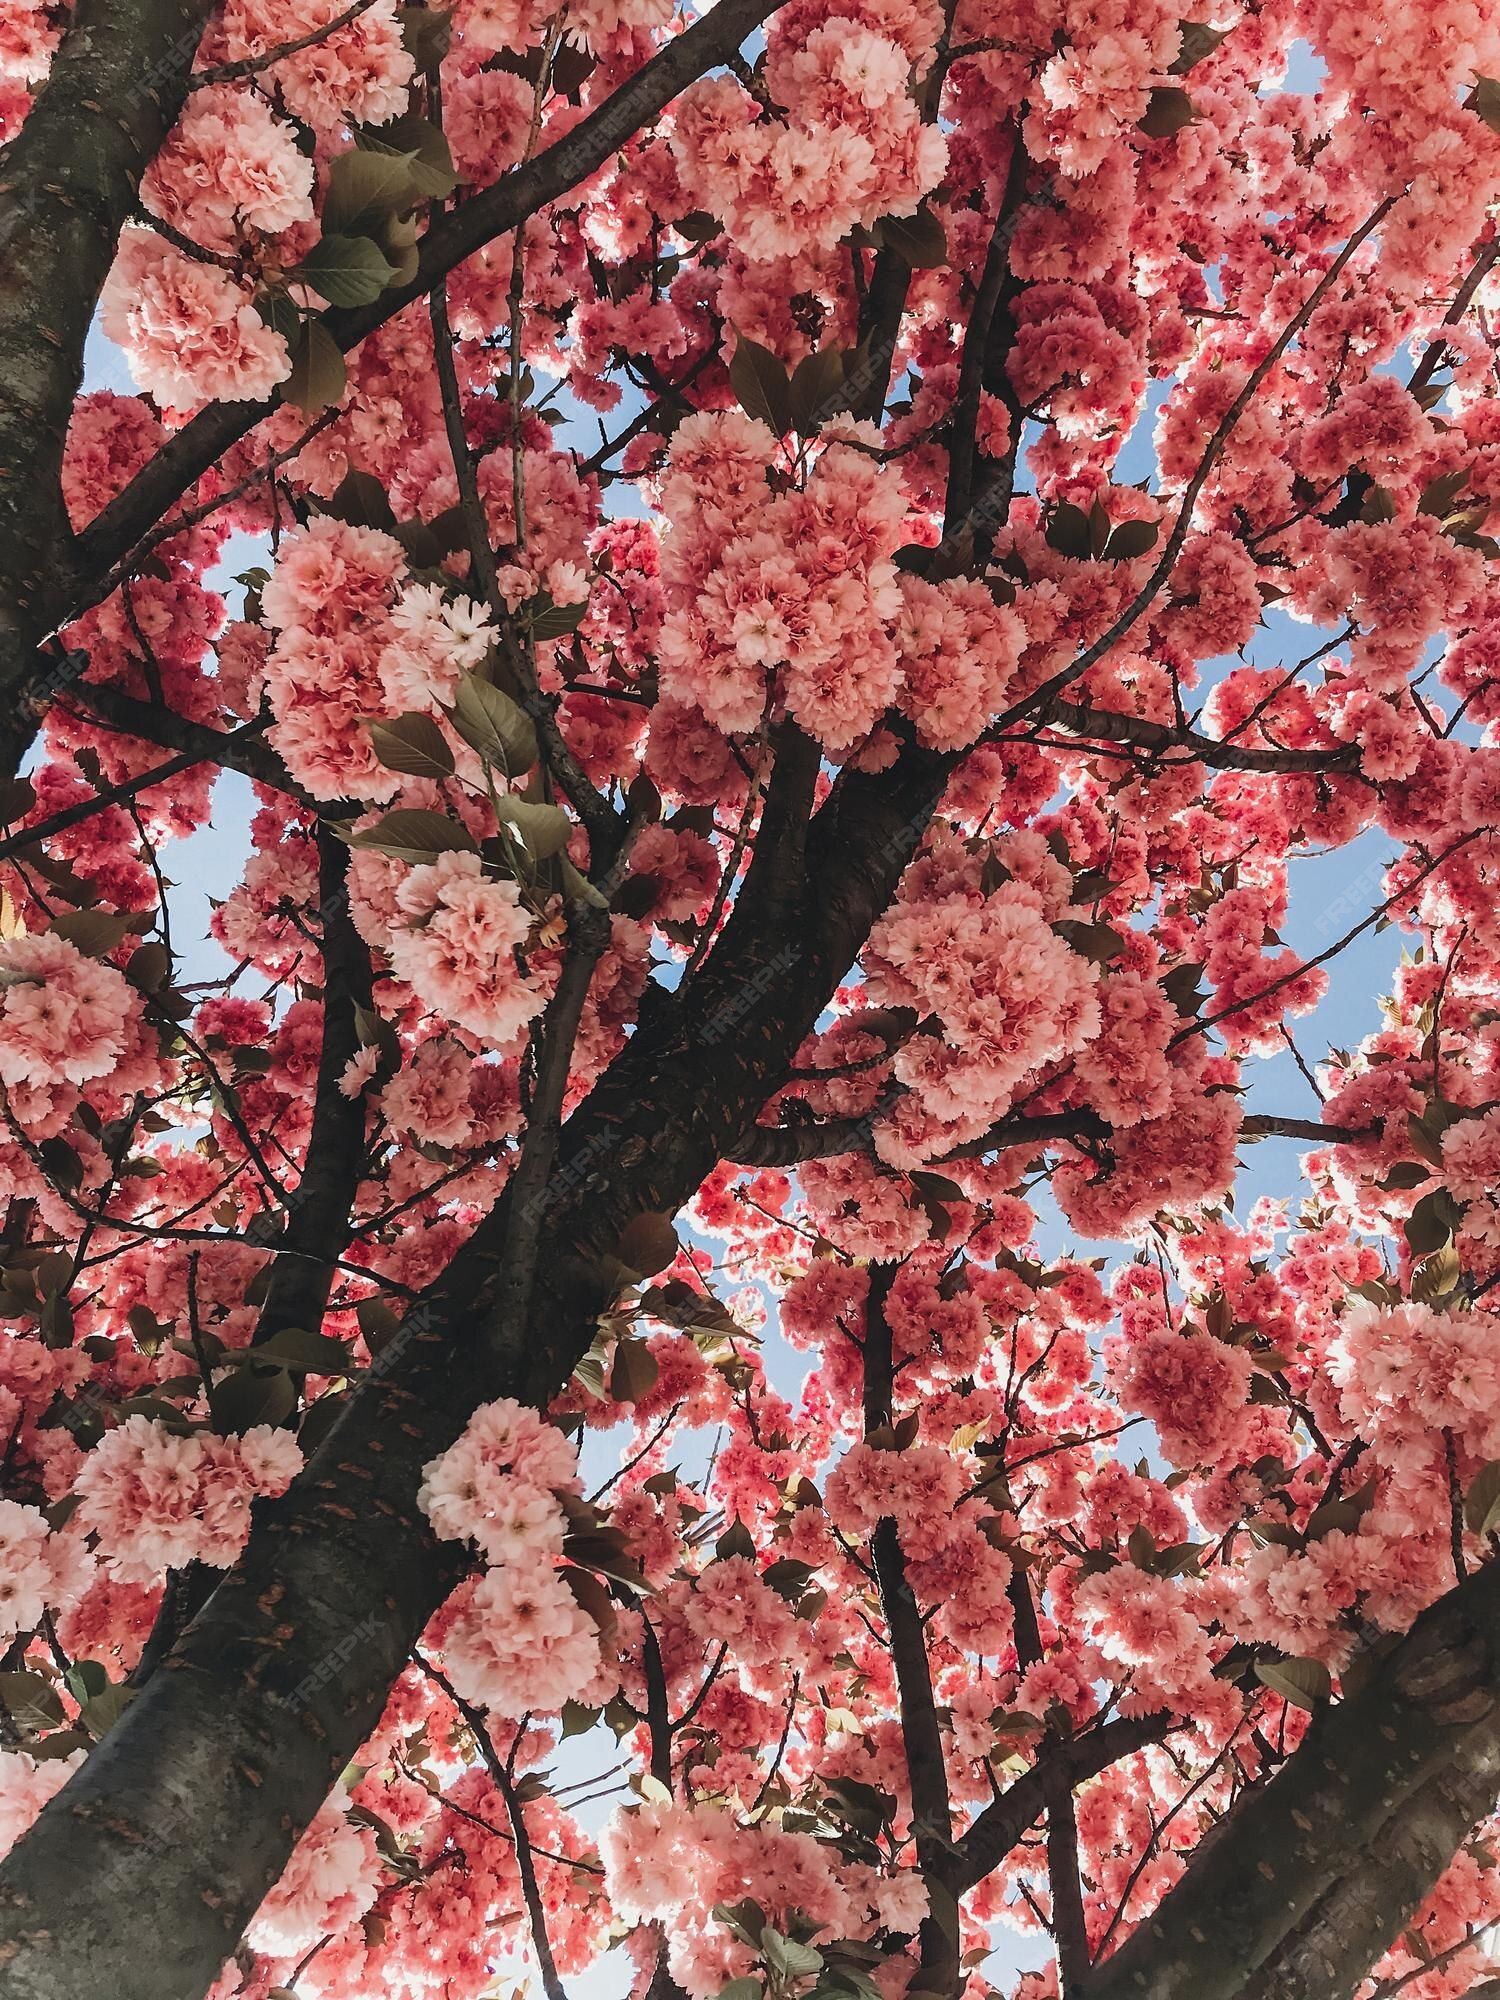 Pink flowers on a tree branch - Cherry blossom